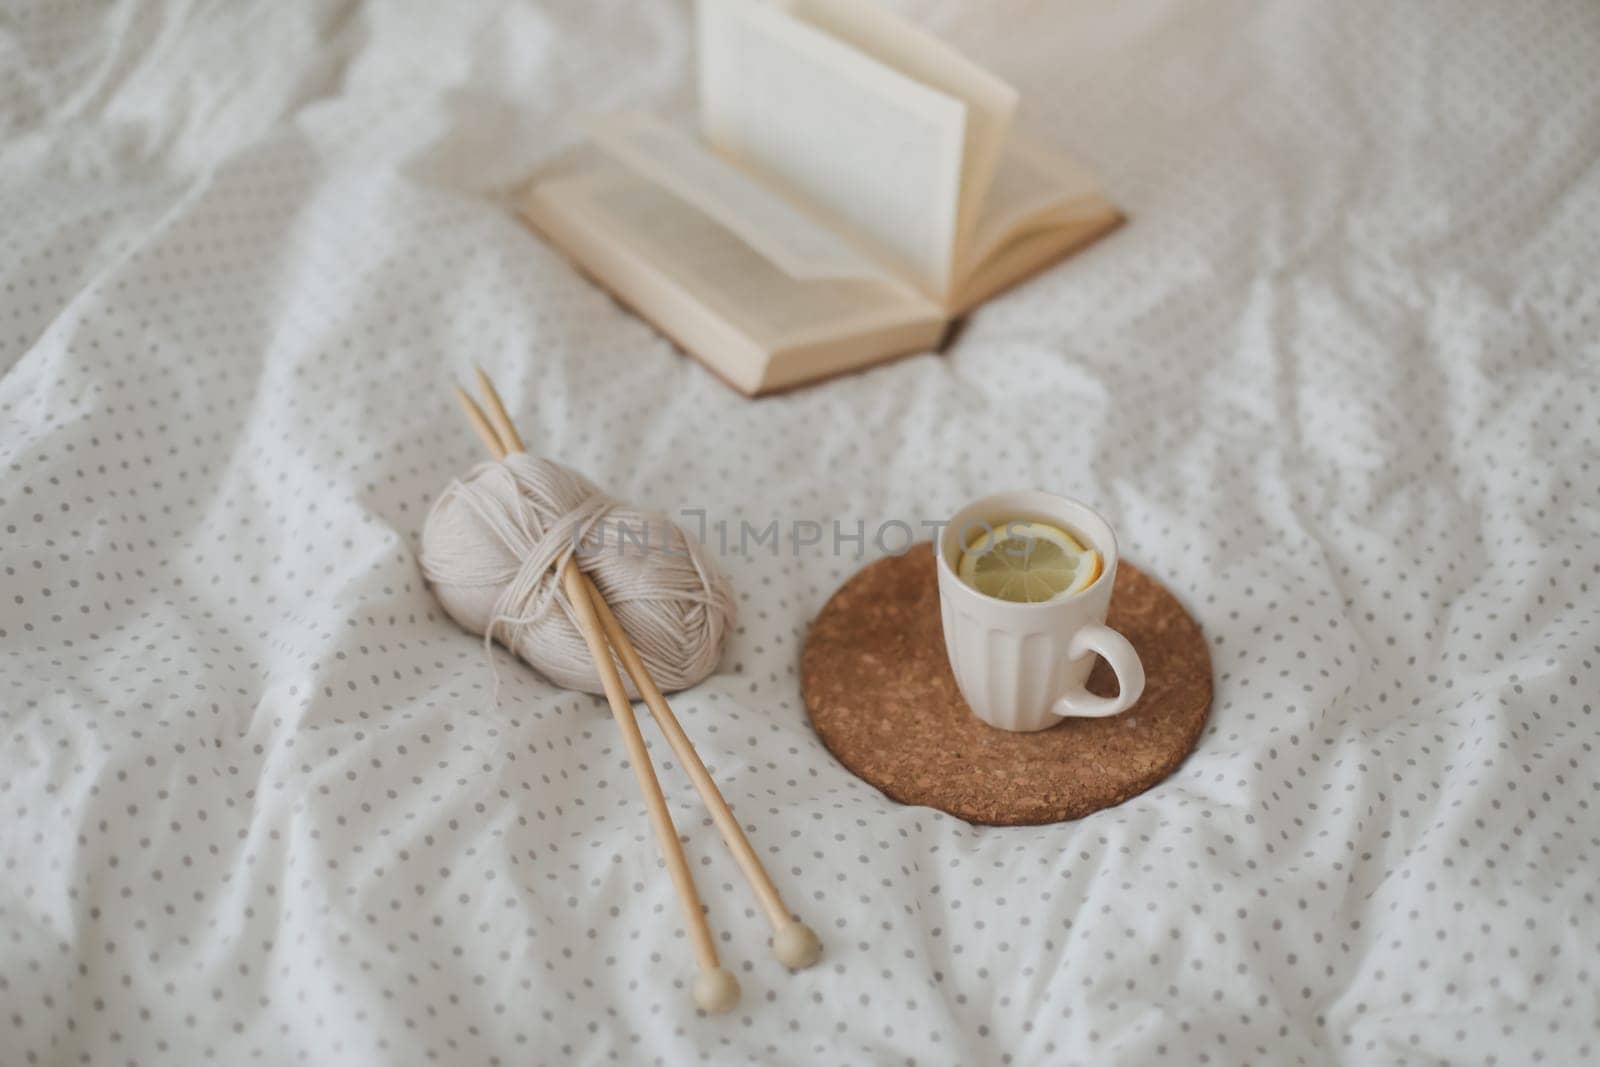 yarn and a cup lemon on the bed. Hygge lifestyle, cozy mood. Handicraft day concept.